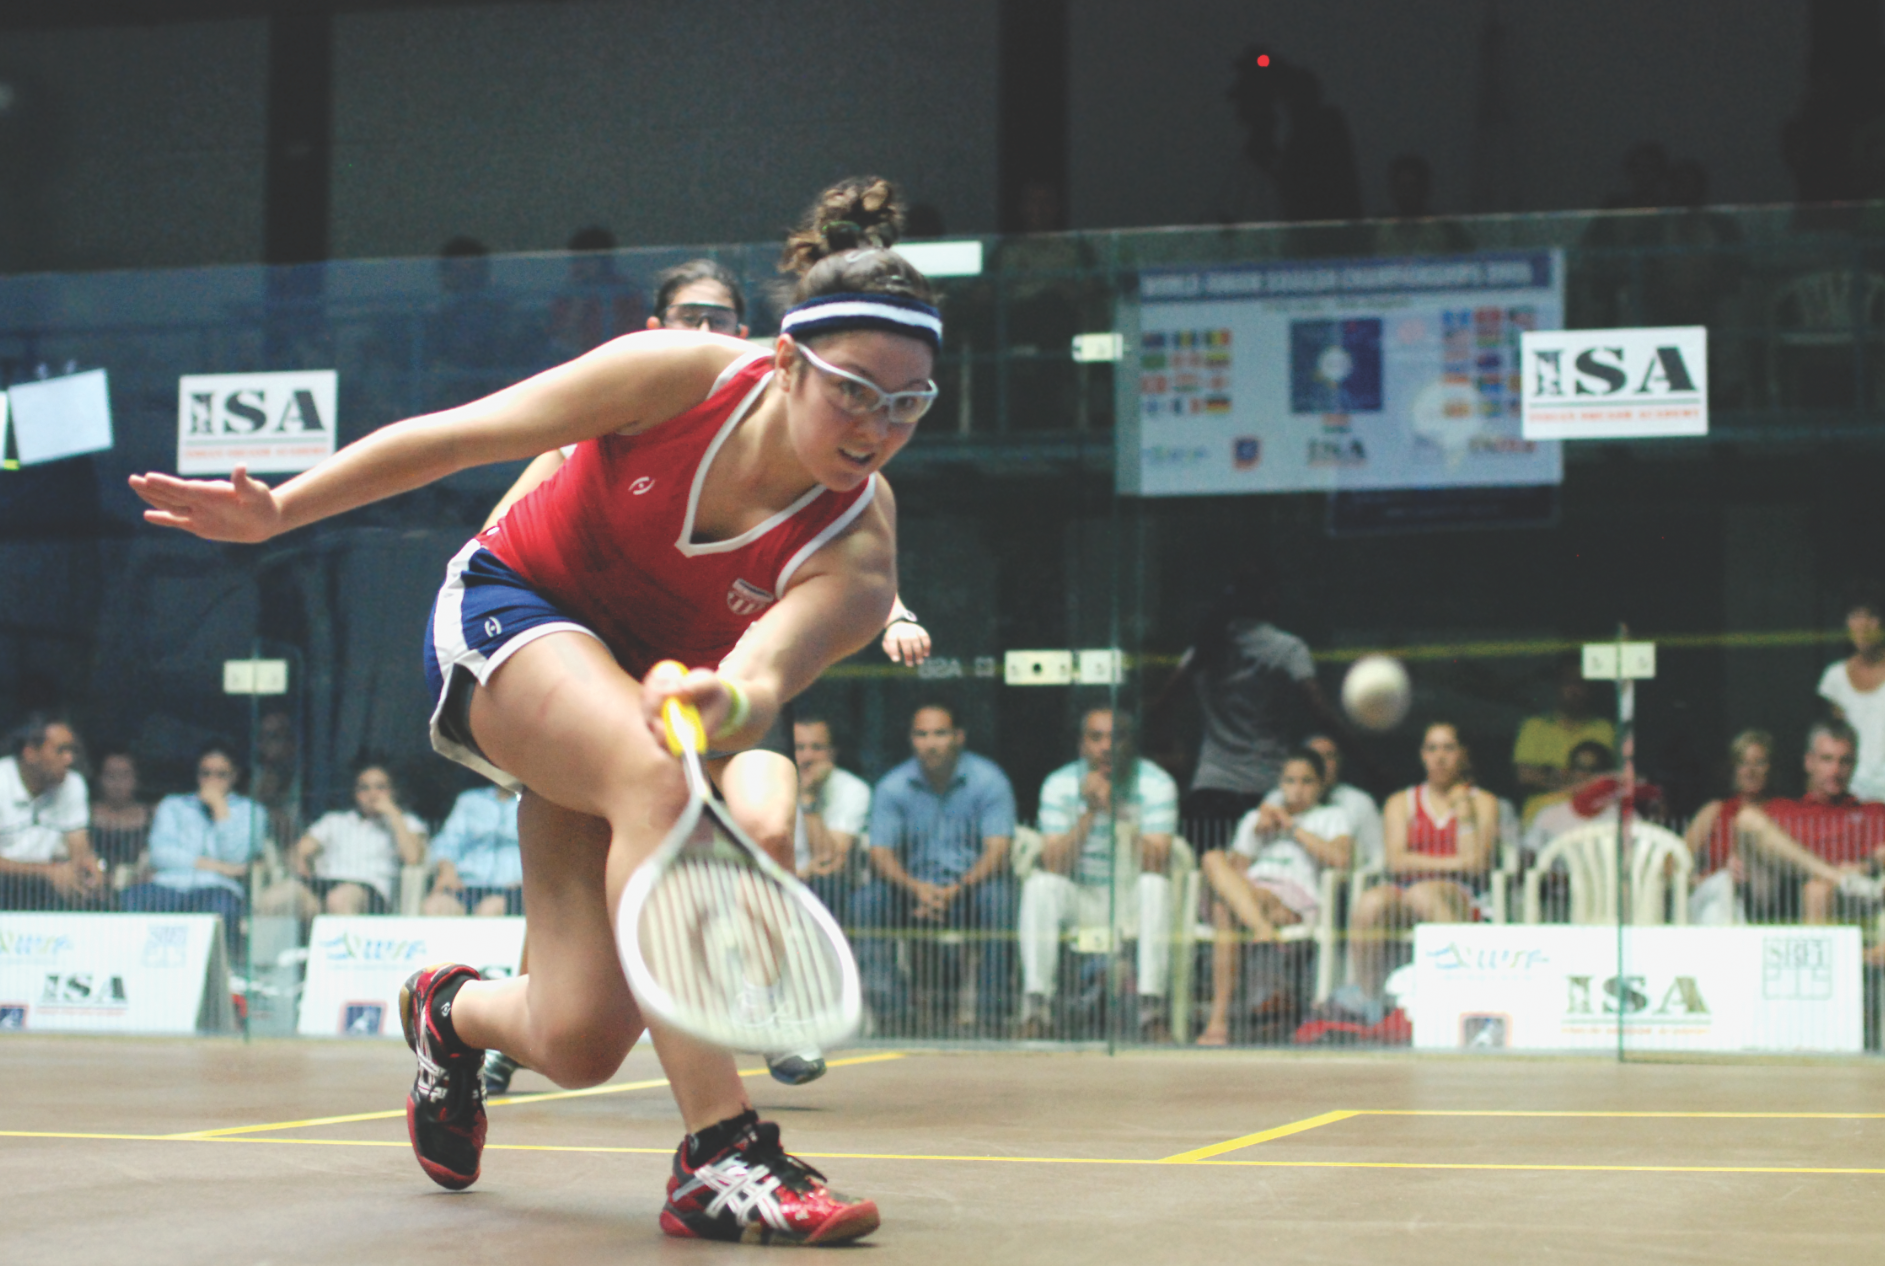 In the semifinals of the Junior World Team Championships, Amanda Sobhy stunned the junior squash world by defeating the newly crowned World Individual Champion, 13-year-old Egyptian Nour El Sherbini, to force a third and deciding match between the teams’ No. 3 players. Egypt hung on to win but Sobhy was the talk of the town.